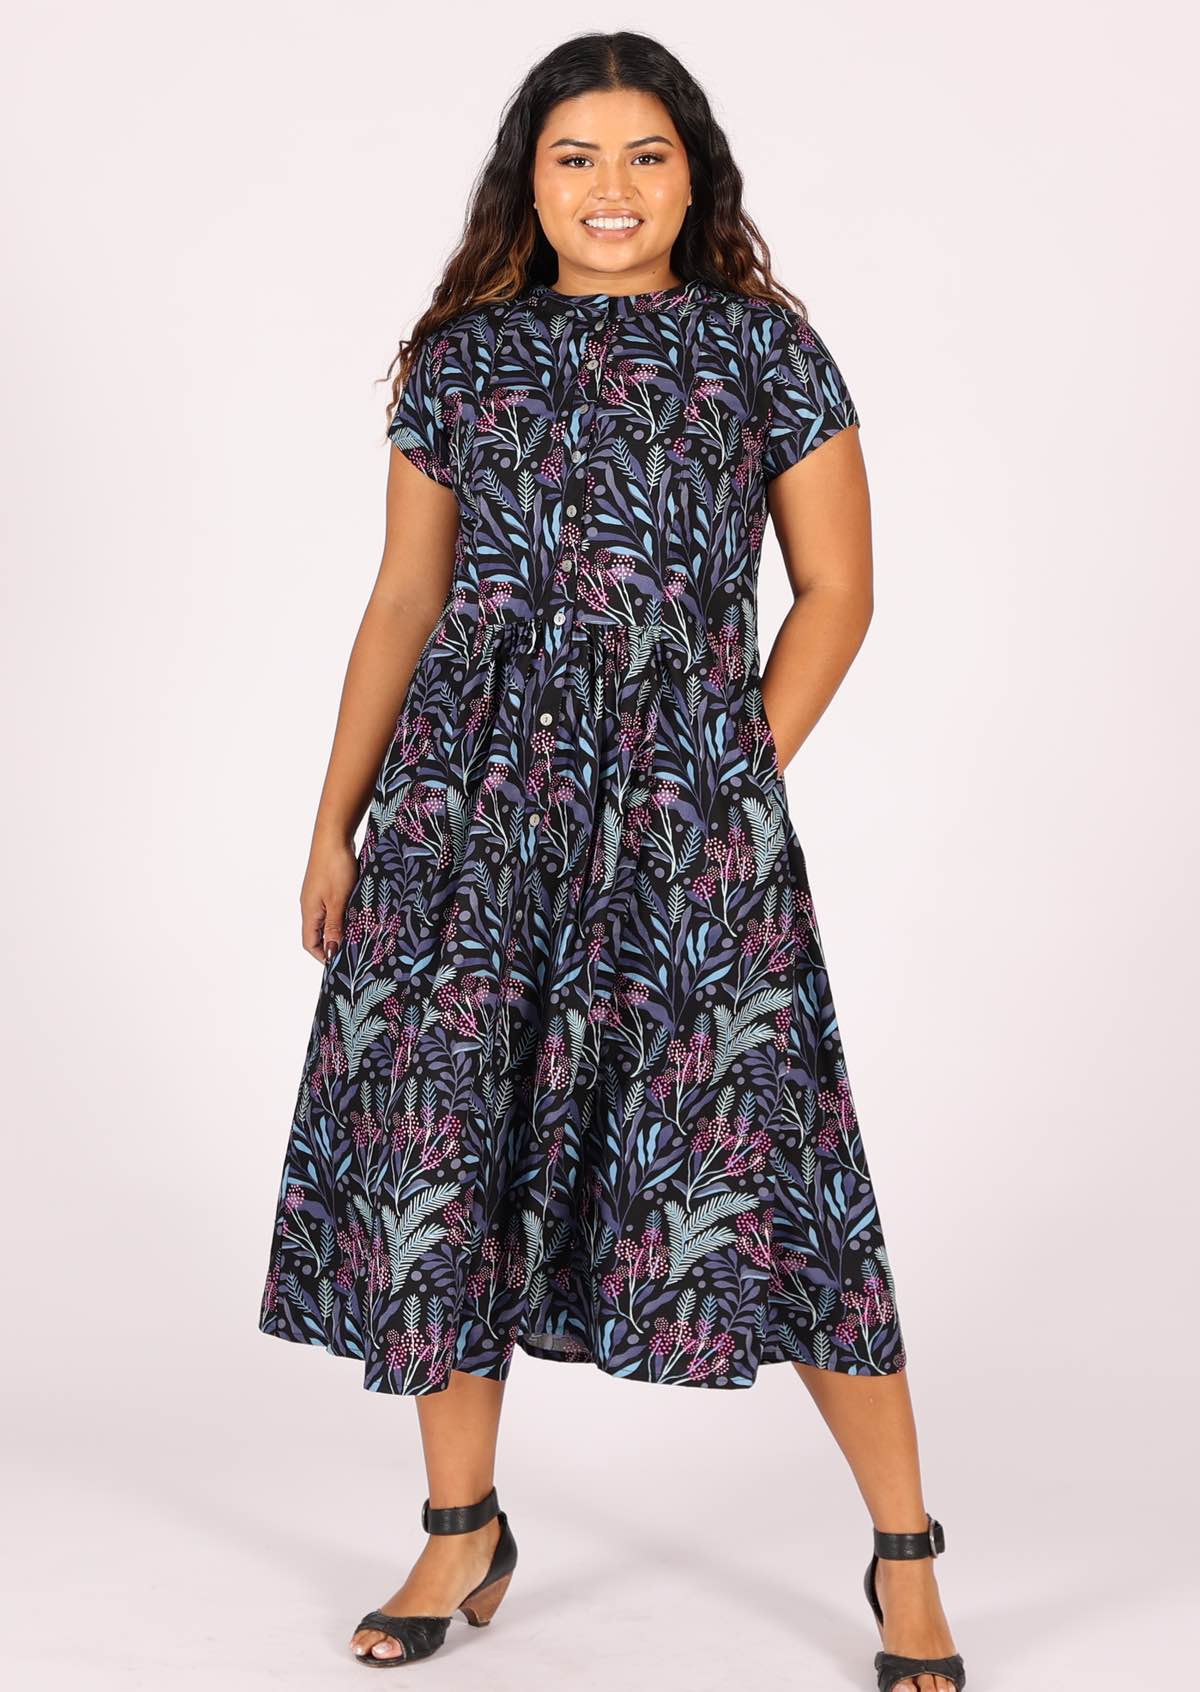 100% cotton 50's style dress can be worn loose, without waist tie